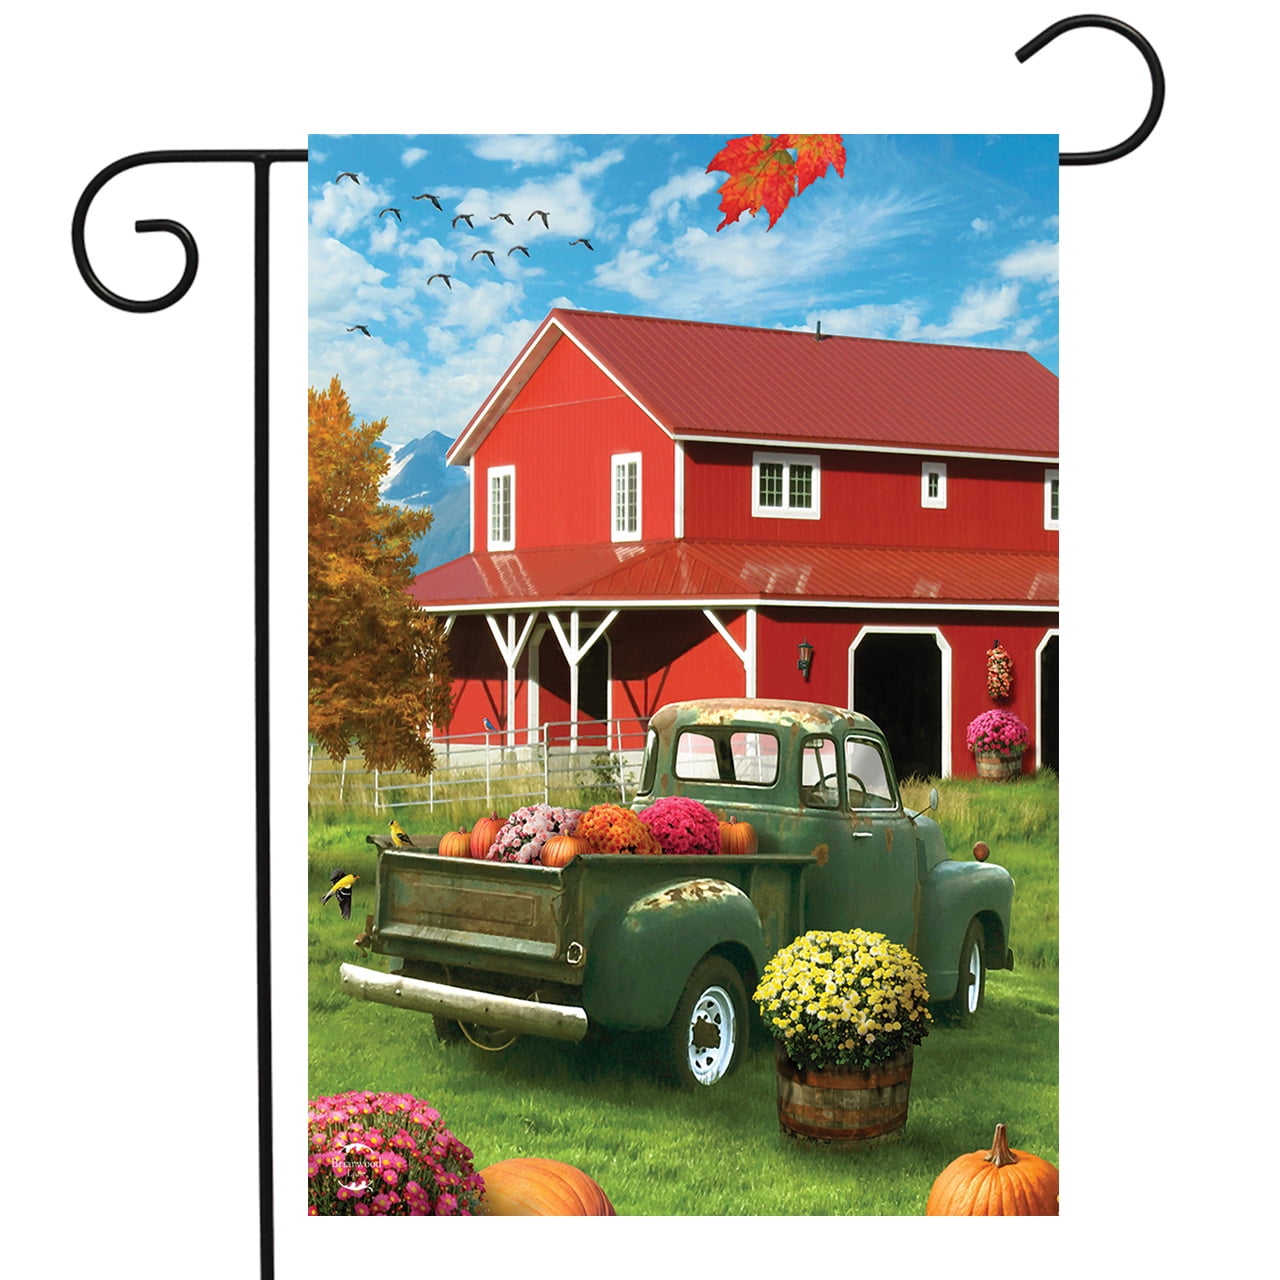 Briarwood Lane Day On The Farm Spring Garden Flag Pick-up Truck Floral 12.5x18 